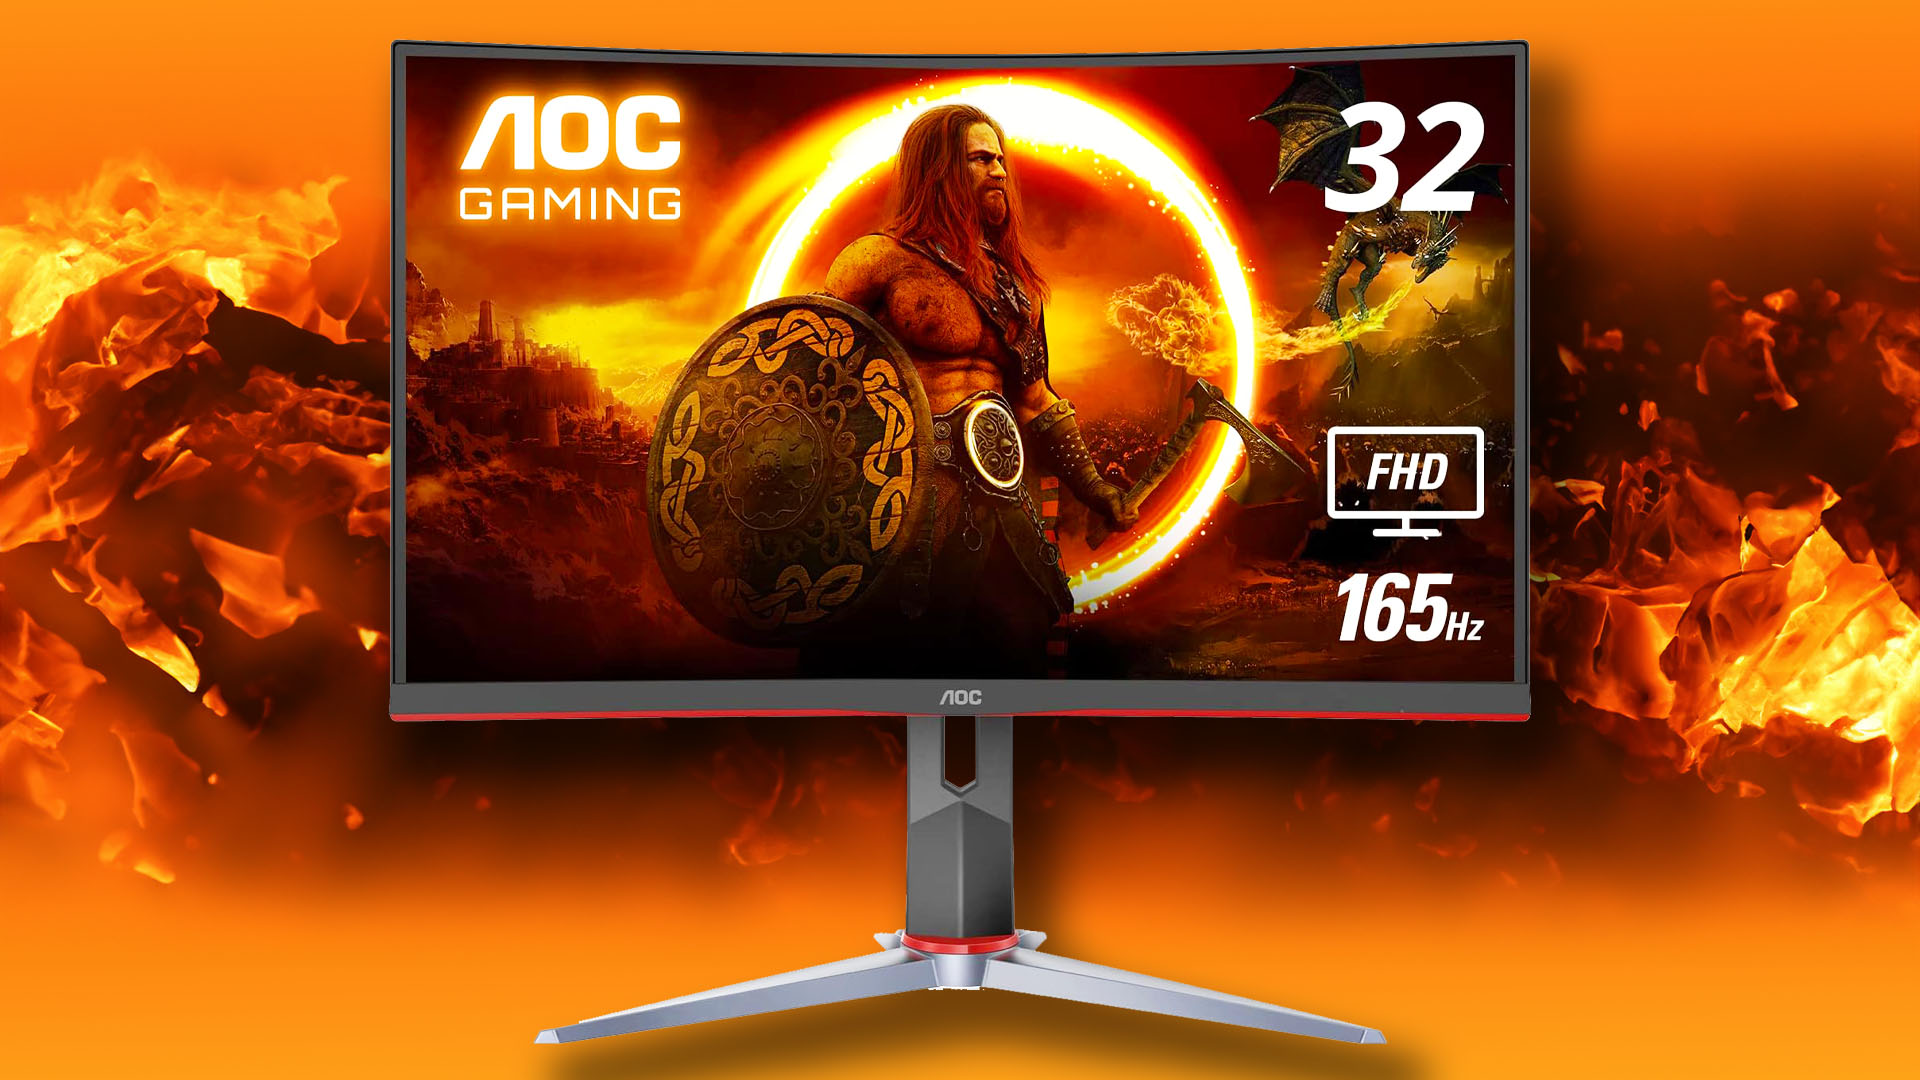 This 32-inch AOC gaming monitor costs just $189 now, if you're quick